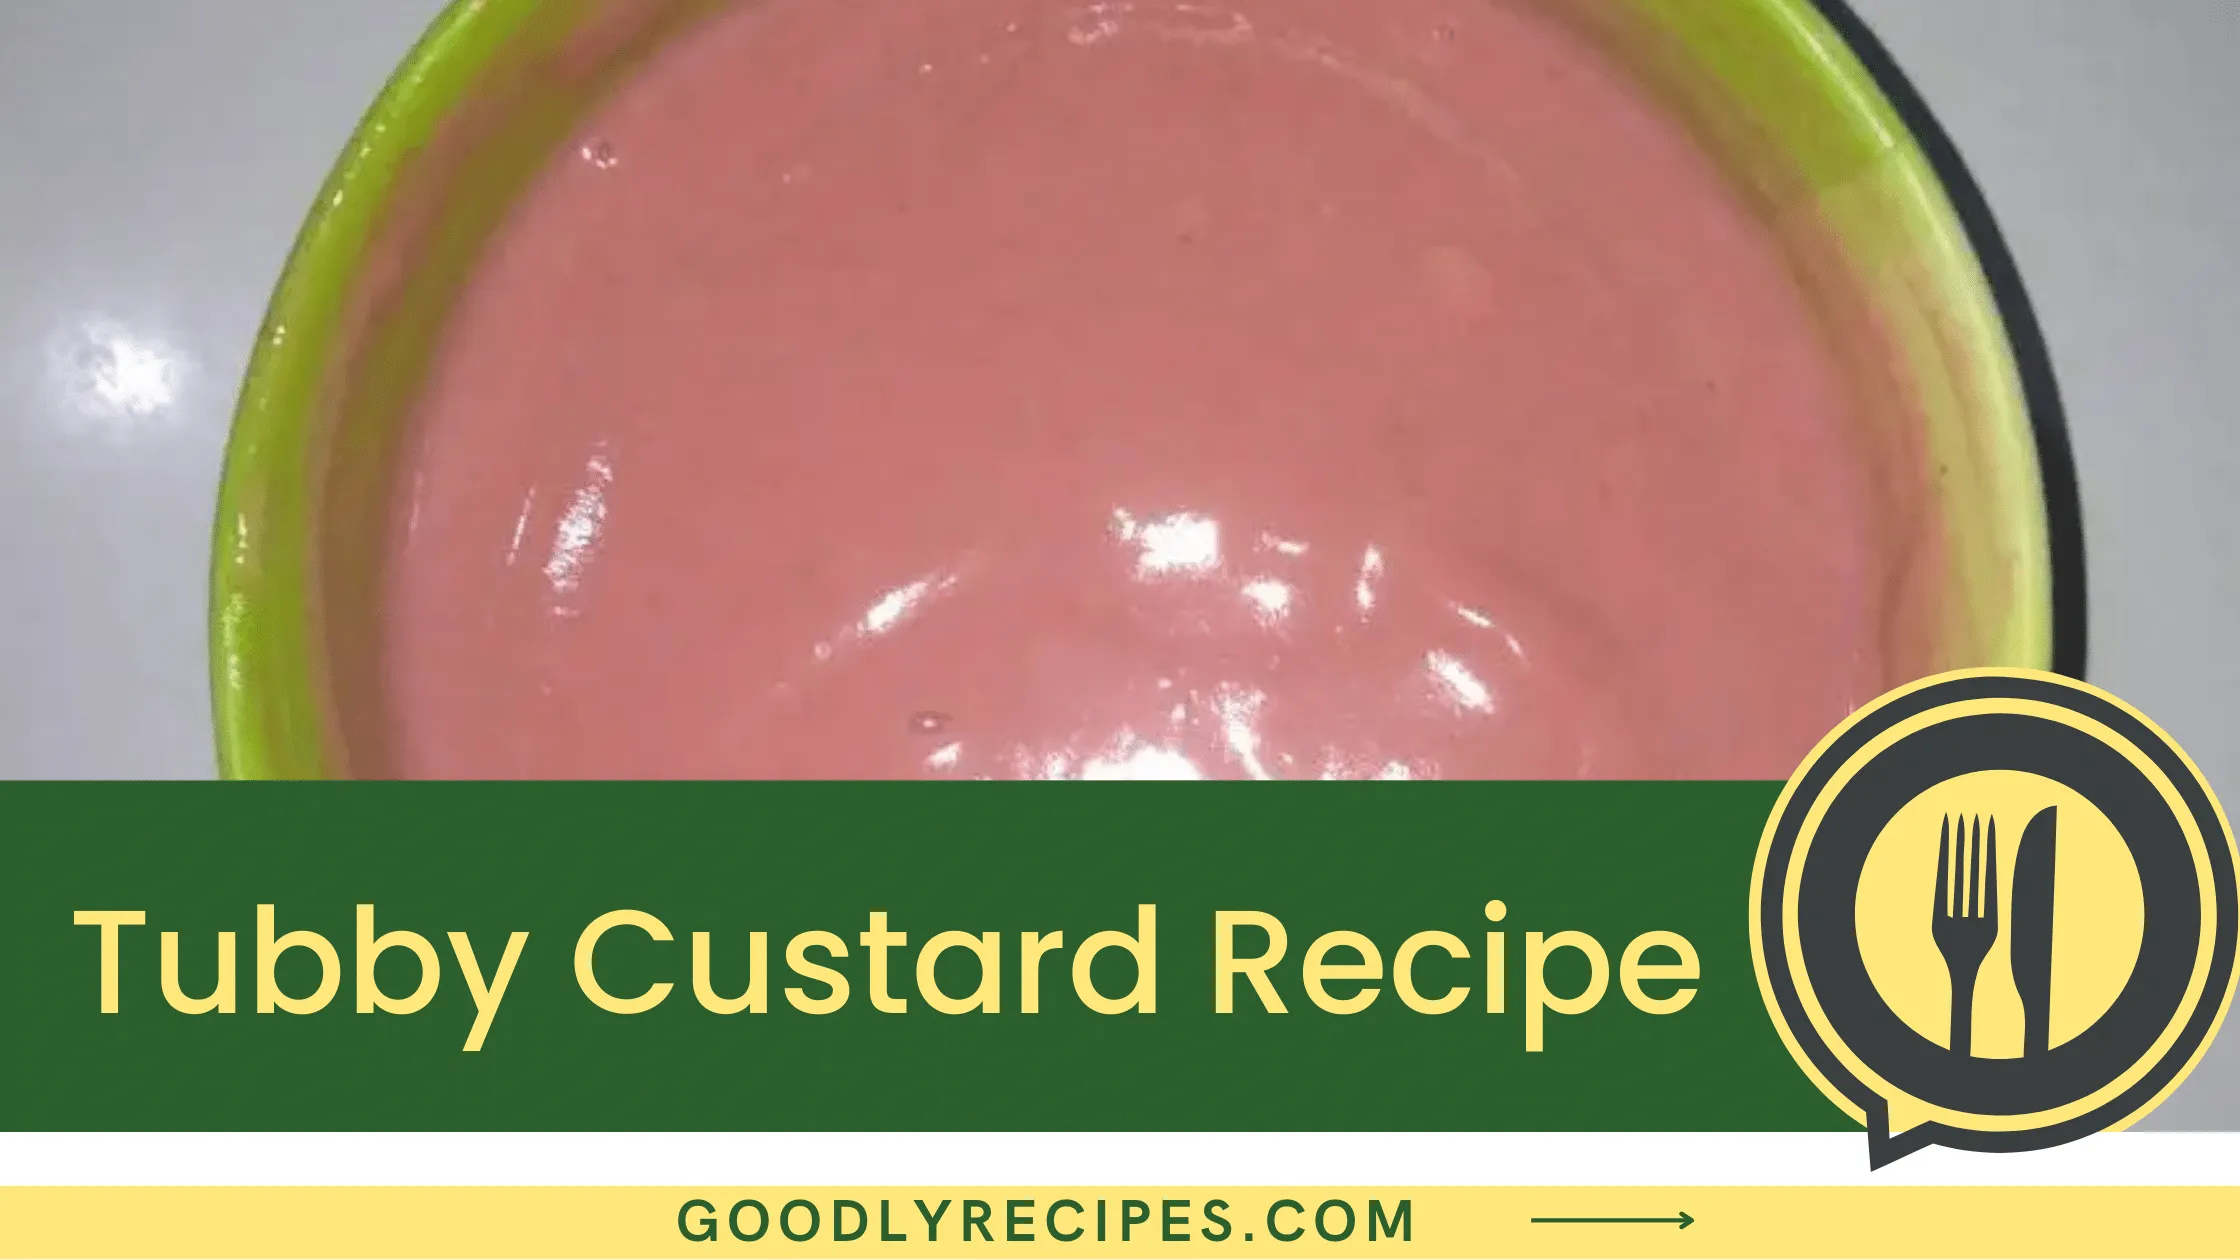 What Is Tubby Custard?